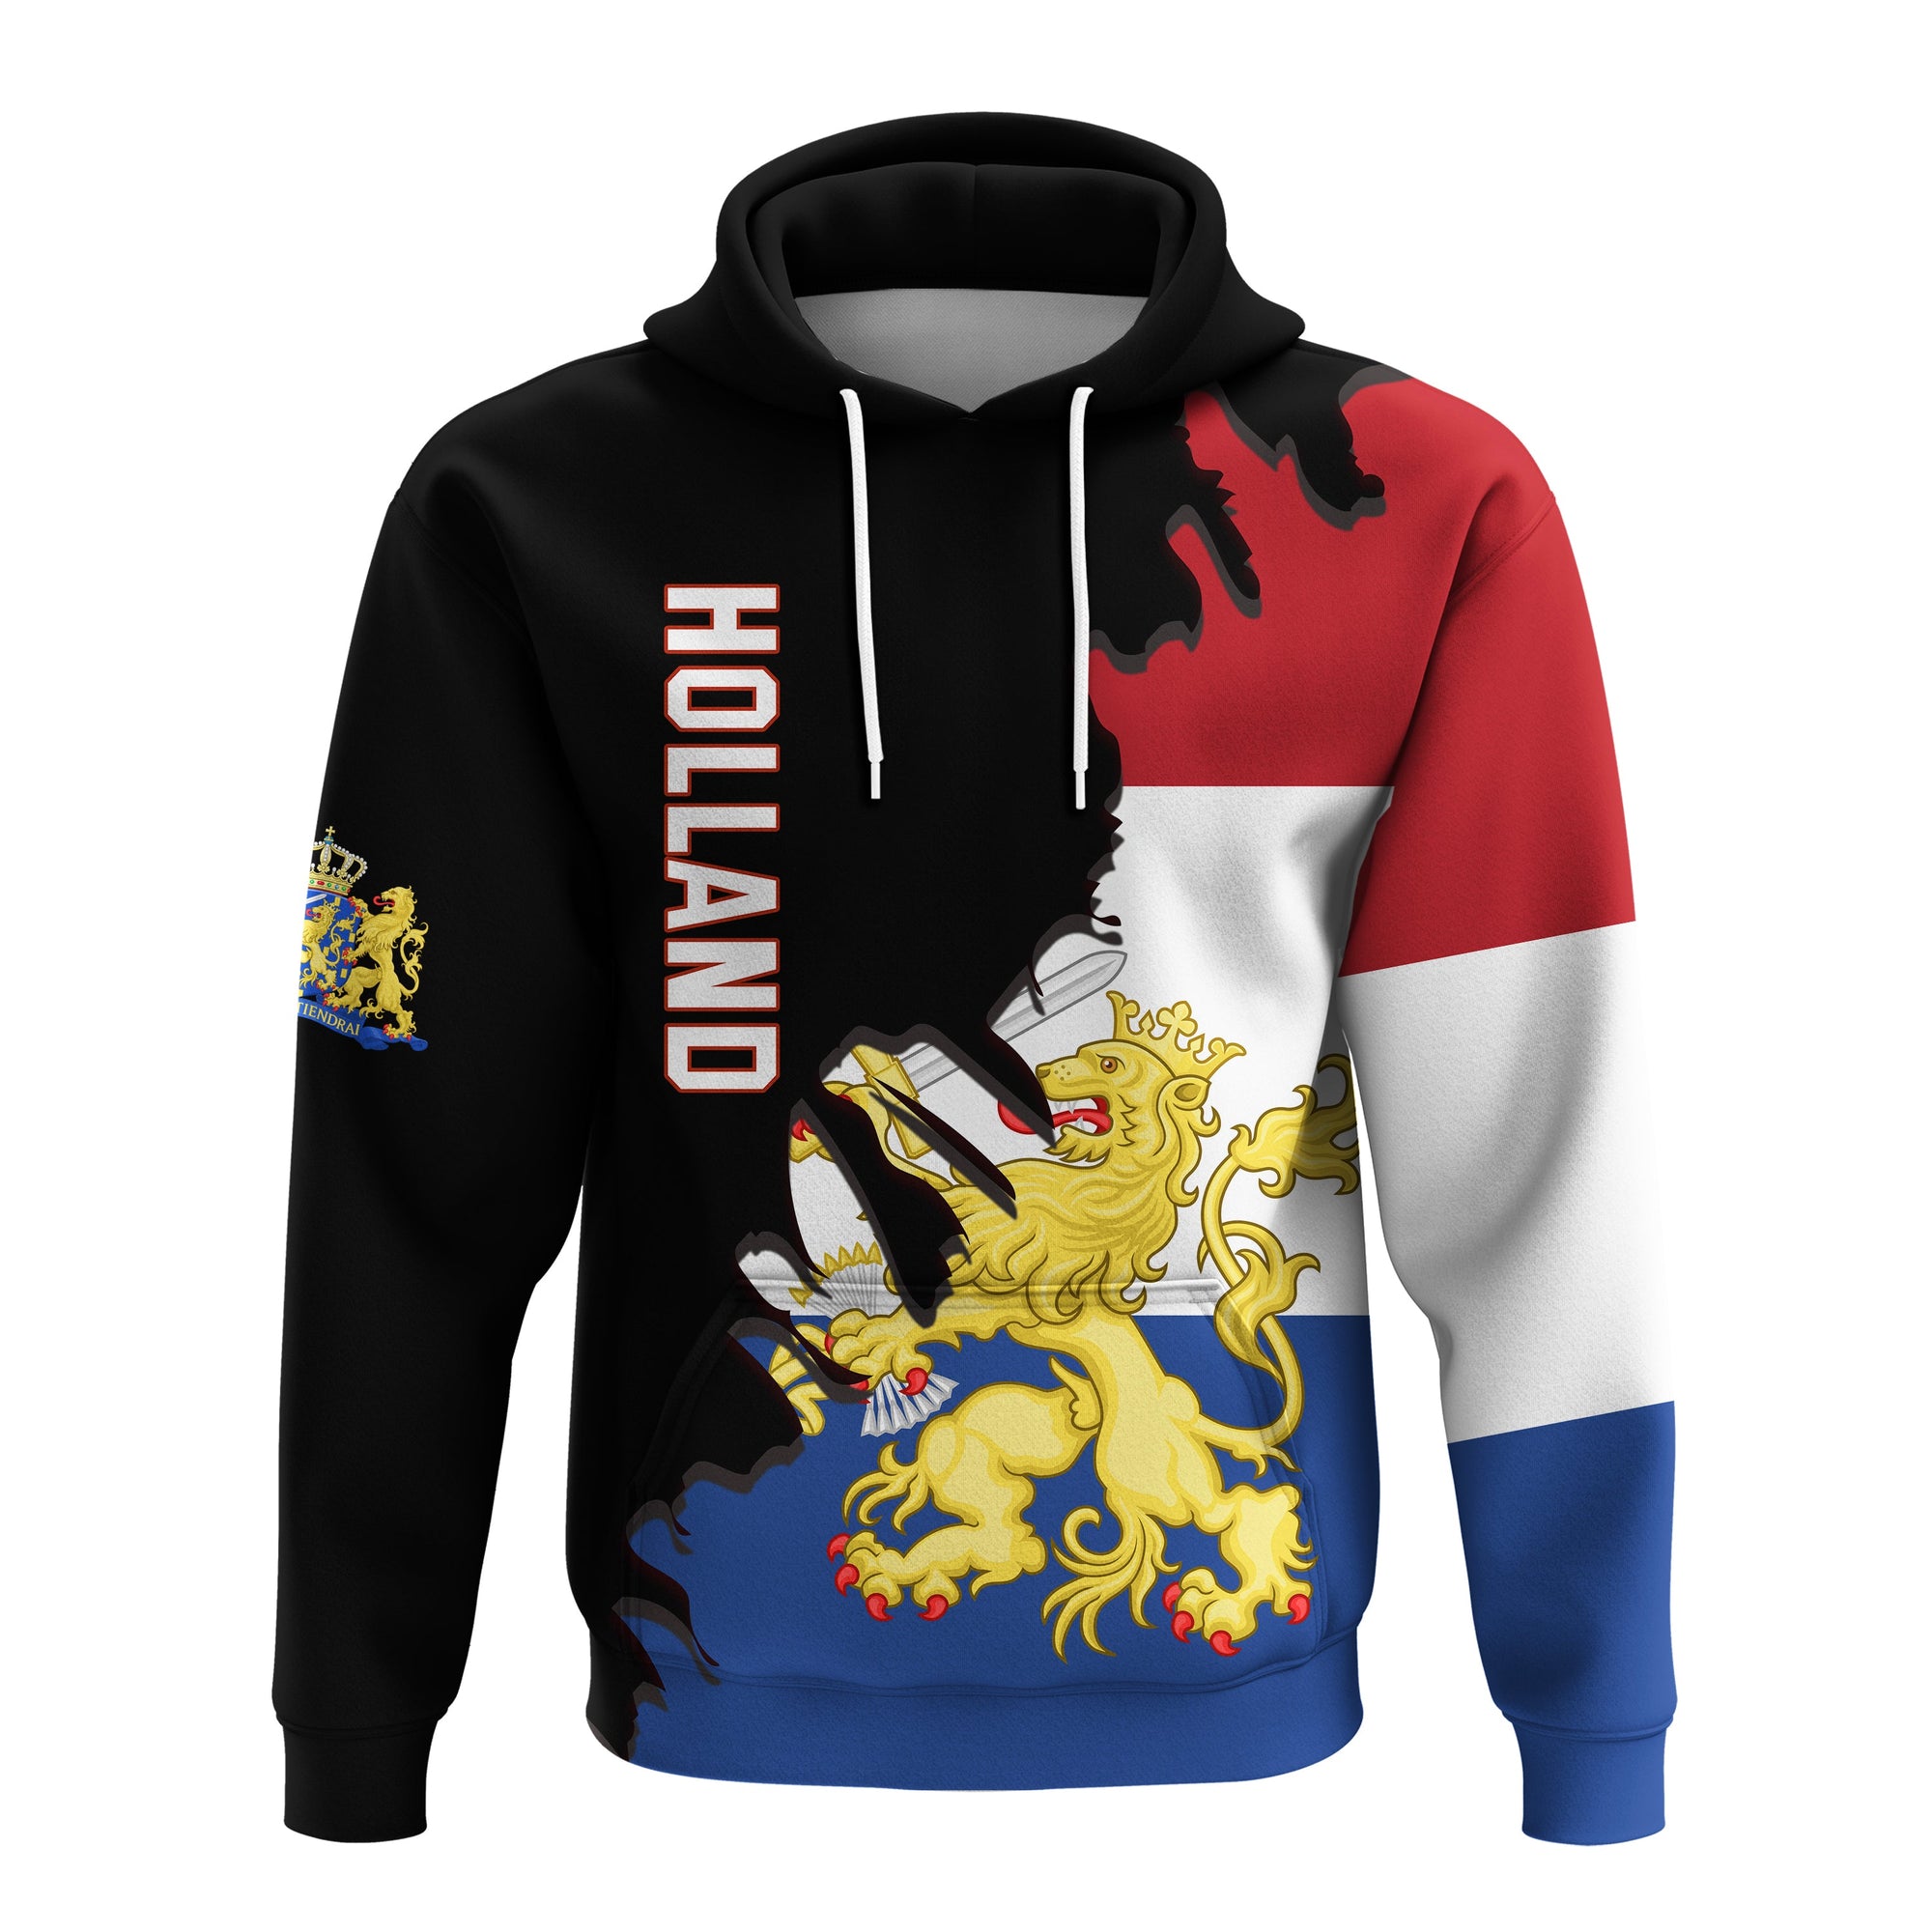 netherlands-hoodie-style-flag-and-map-holland